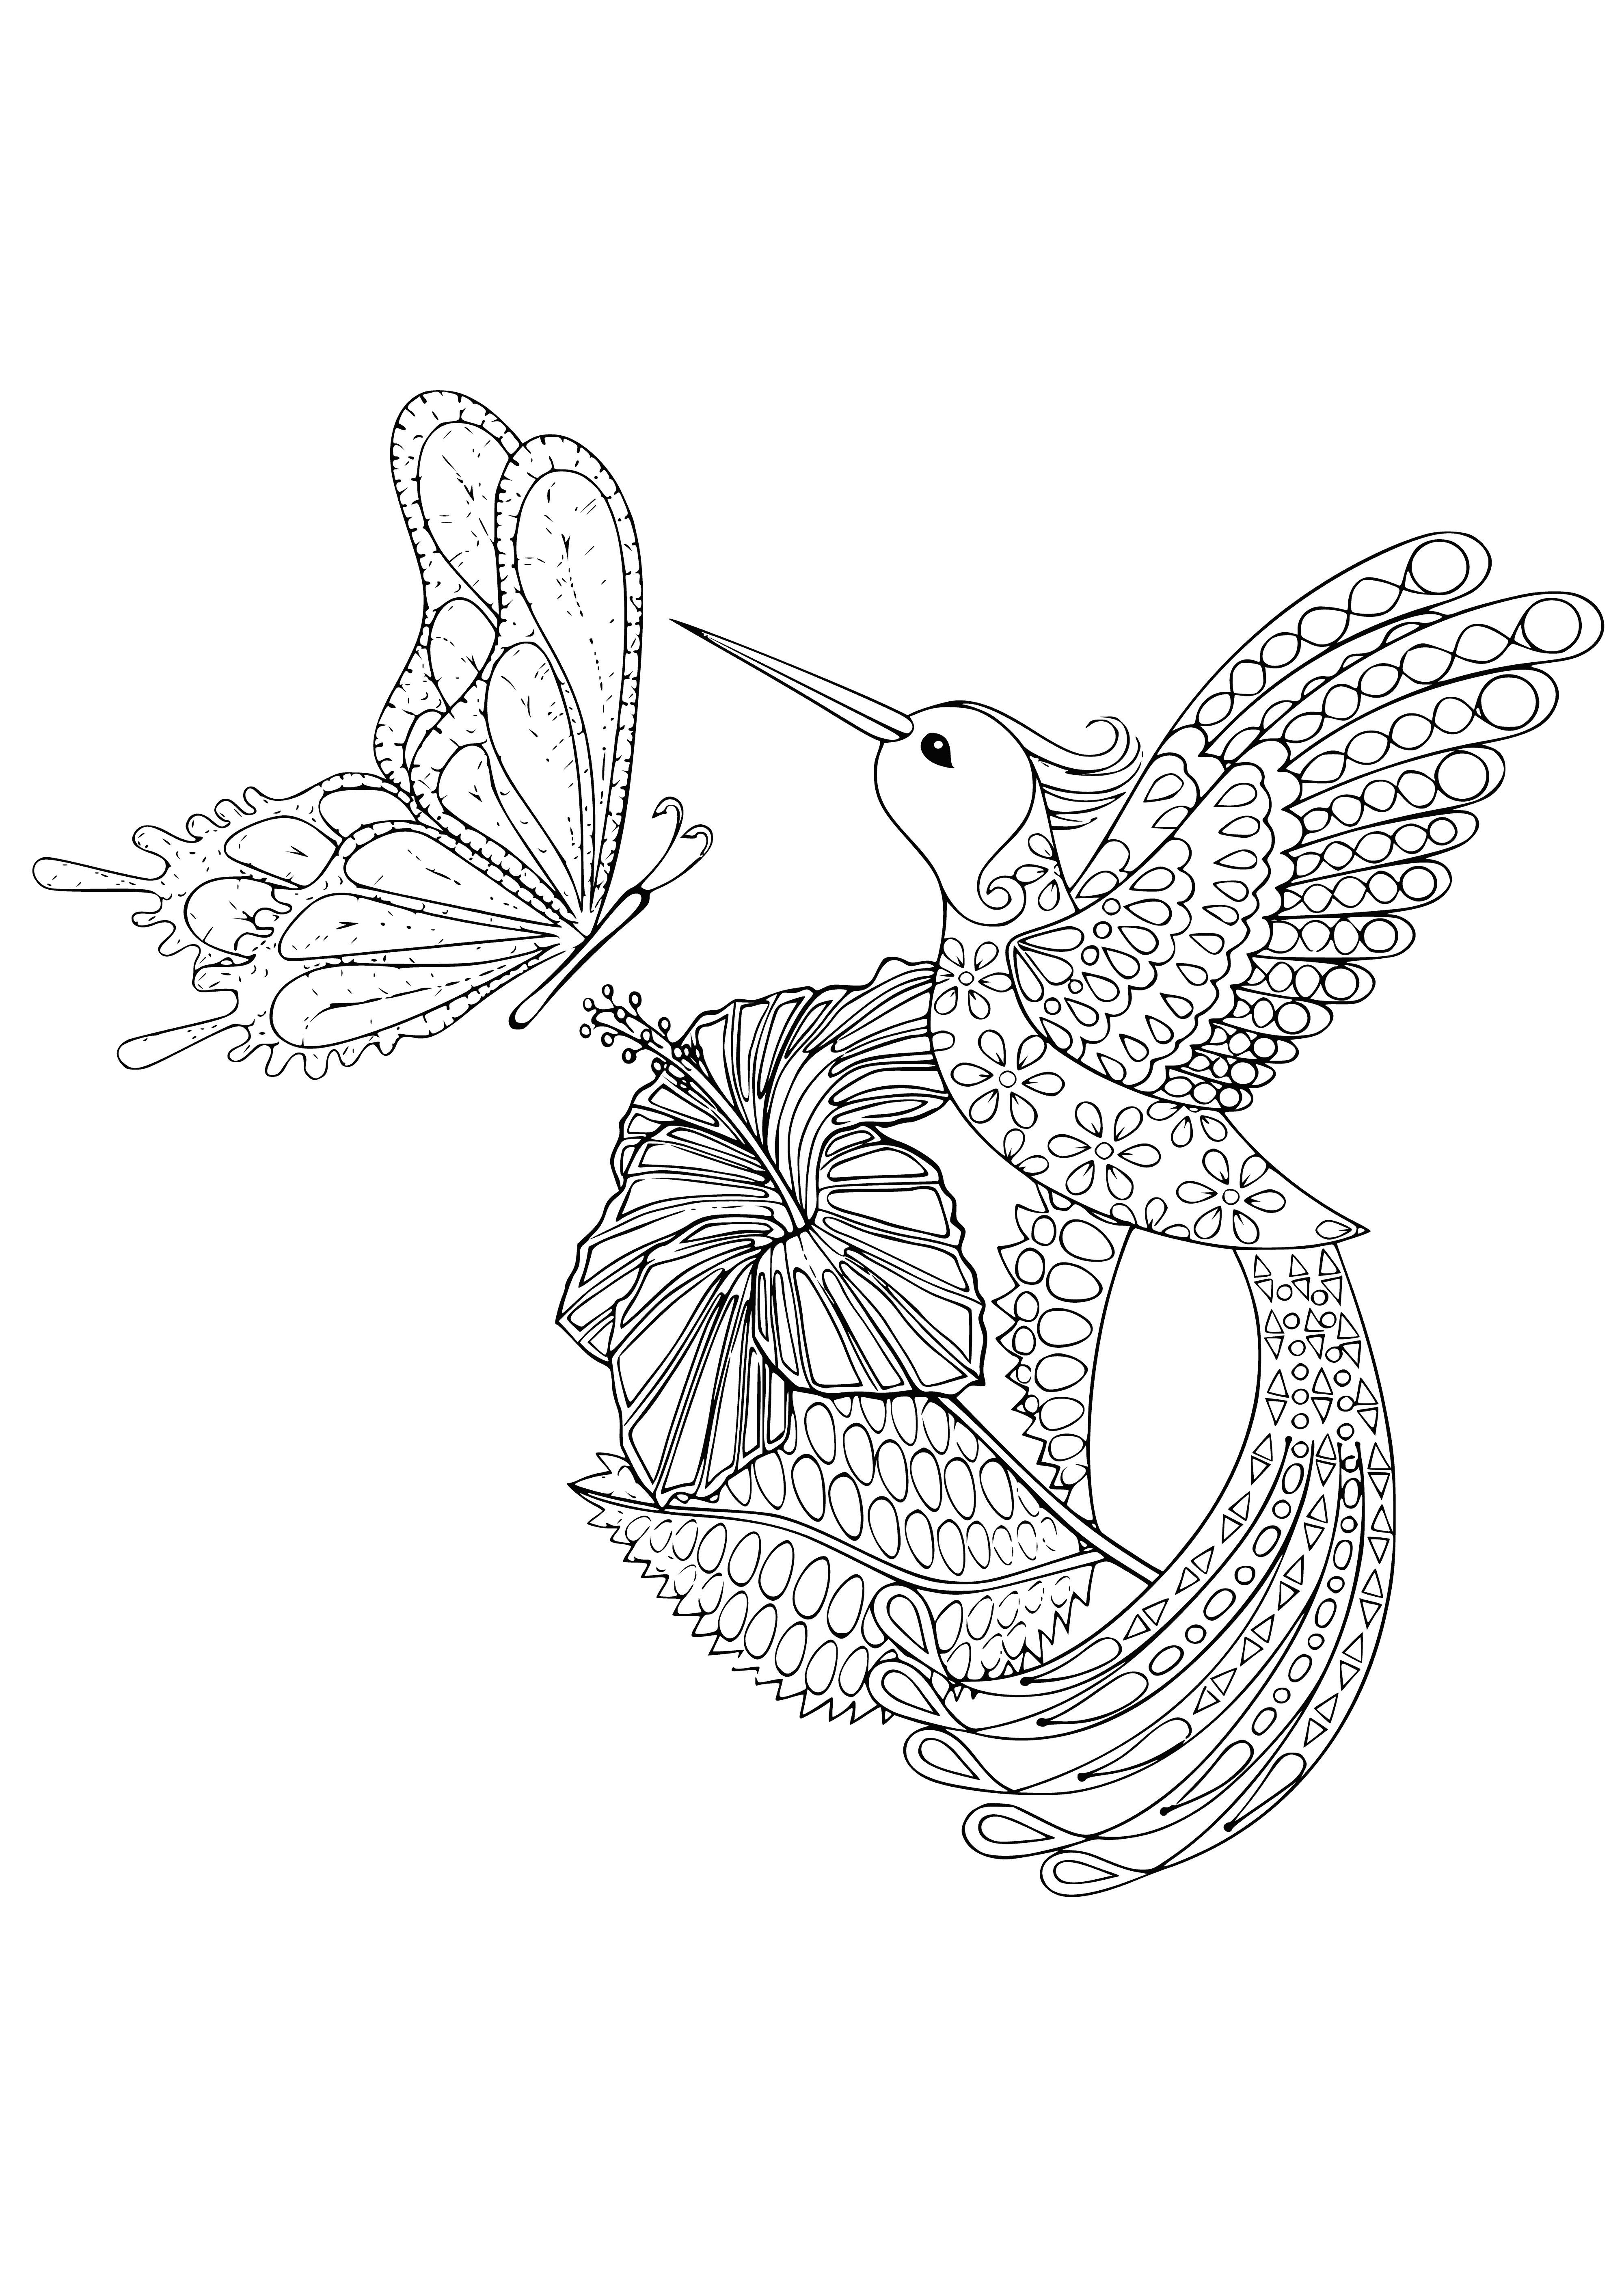 coloring page: Two pink hummingbirds fly side-by-side with curved beaks, thin tails, and small feet.